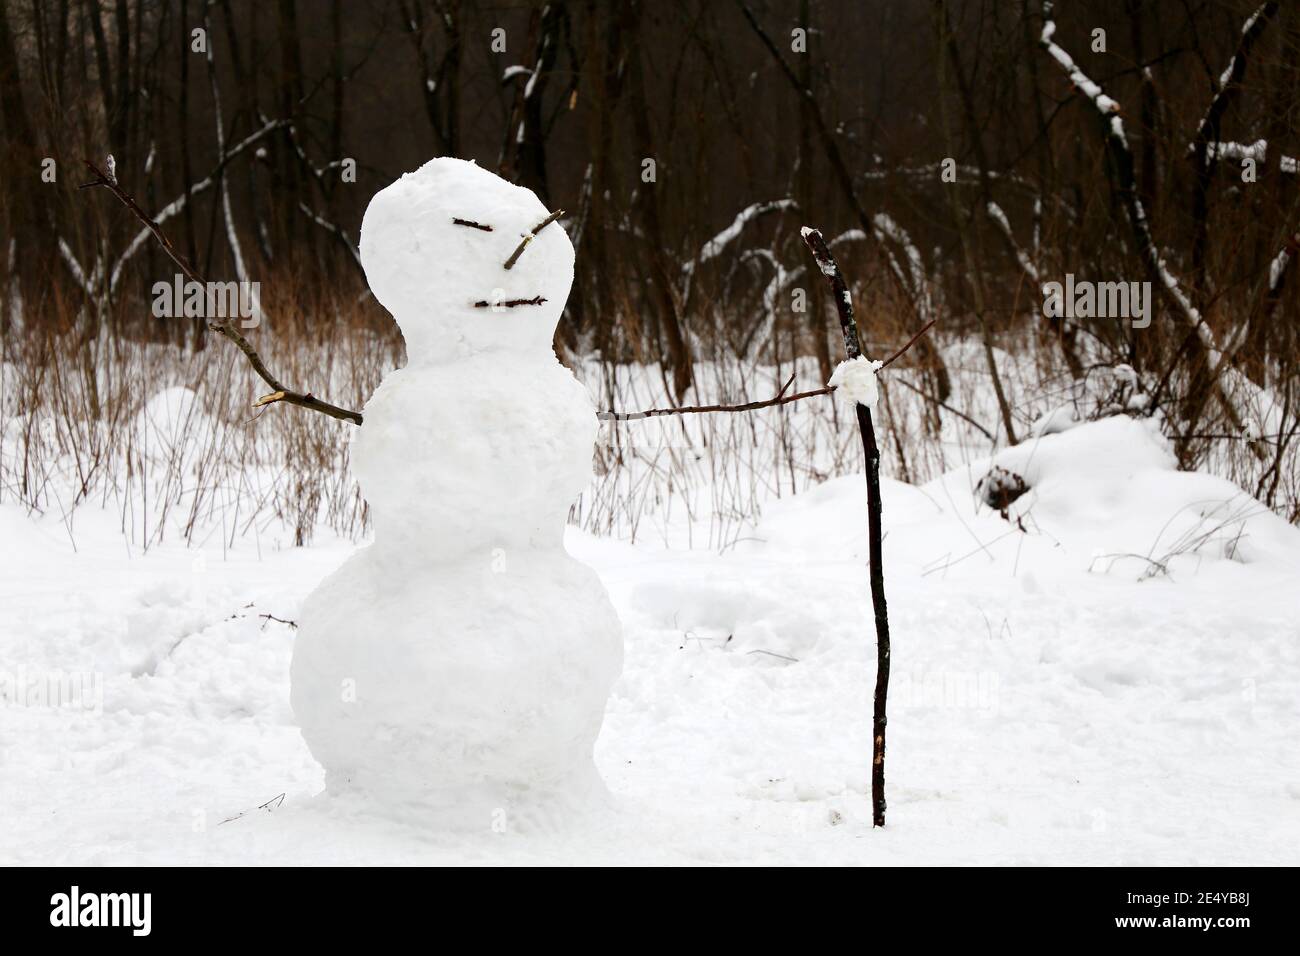 Angry snowman in a winter park. Children's creativity, leisure at cold weather Stock Photo